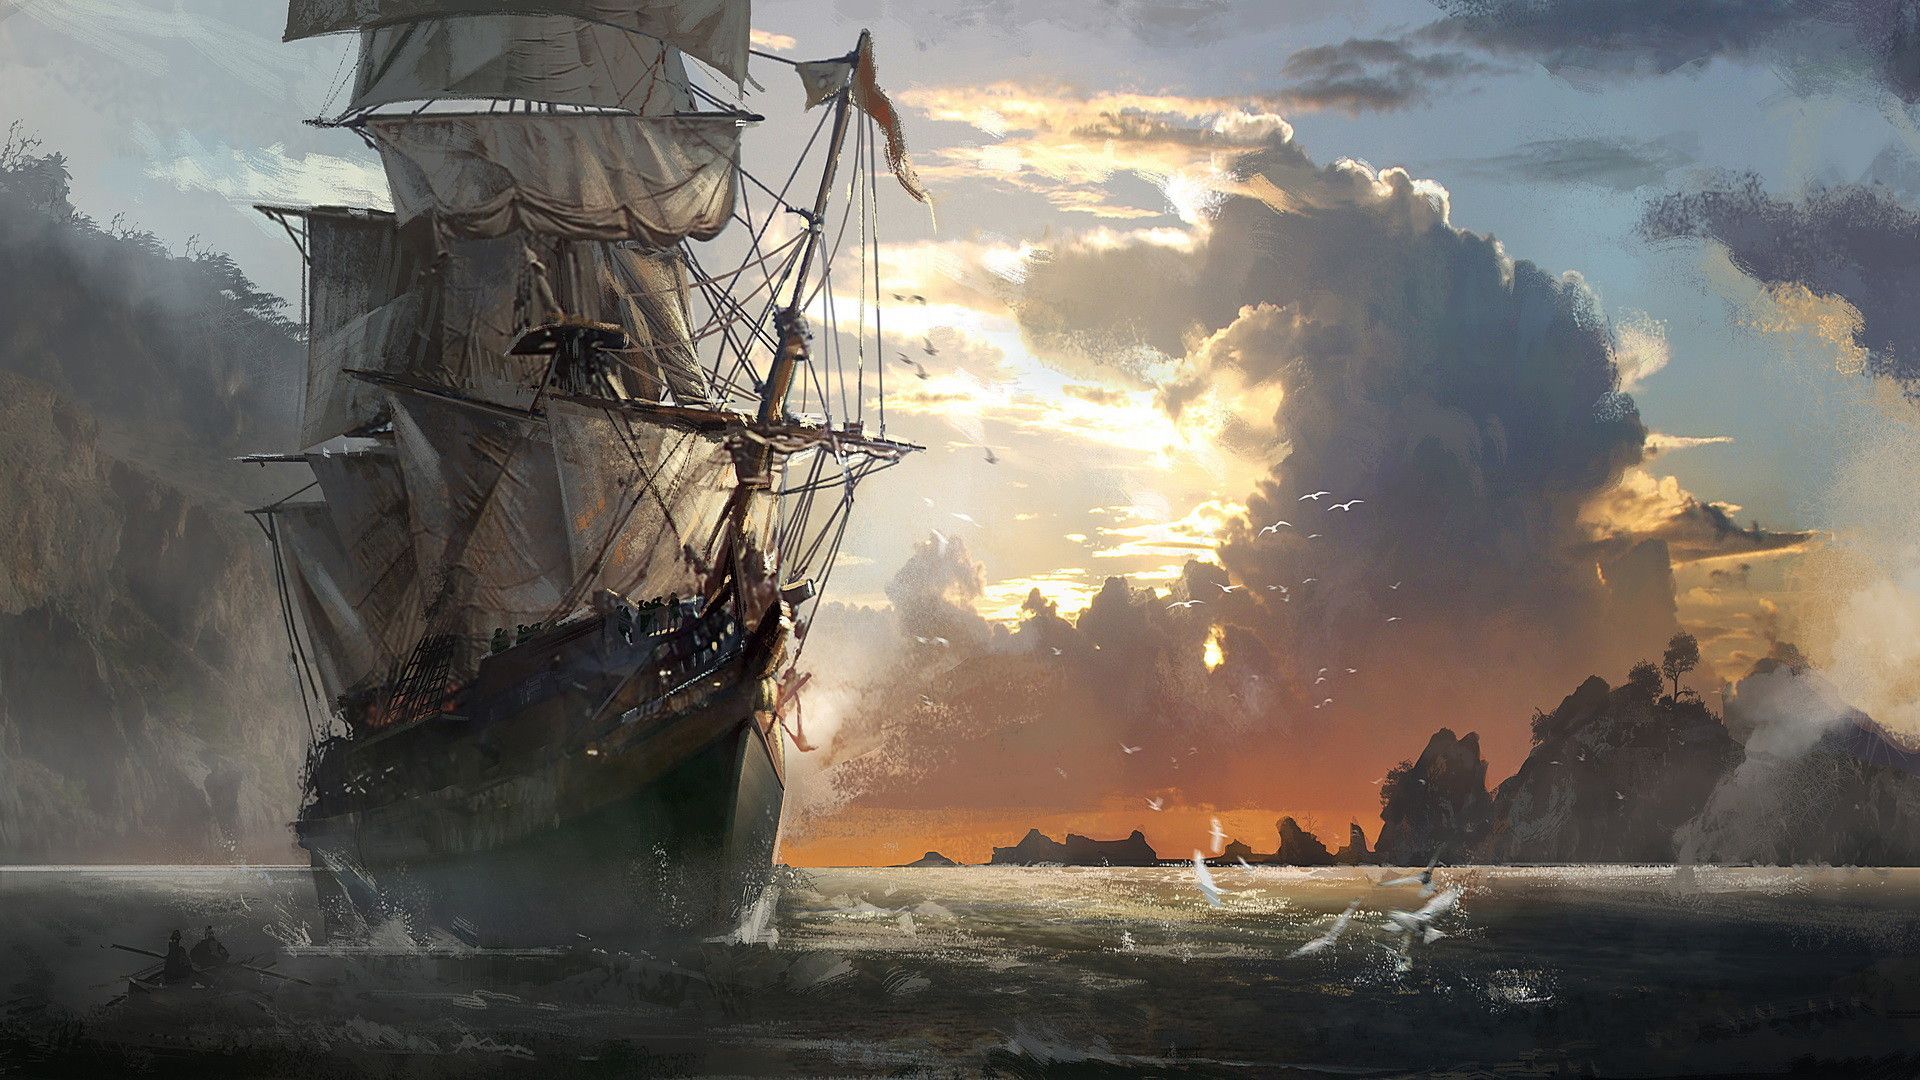 Cool Pirate Wallpapers Wallpapers